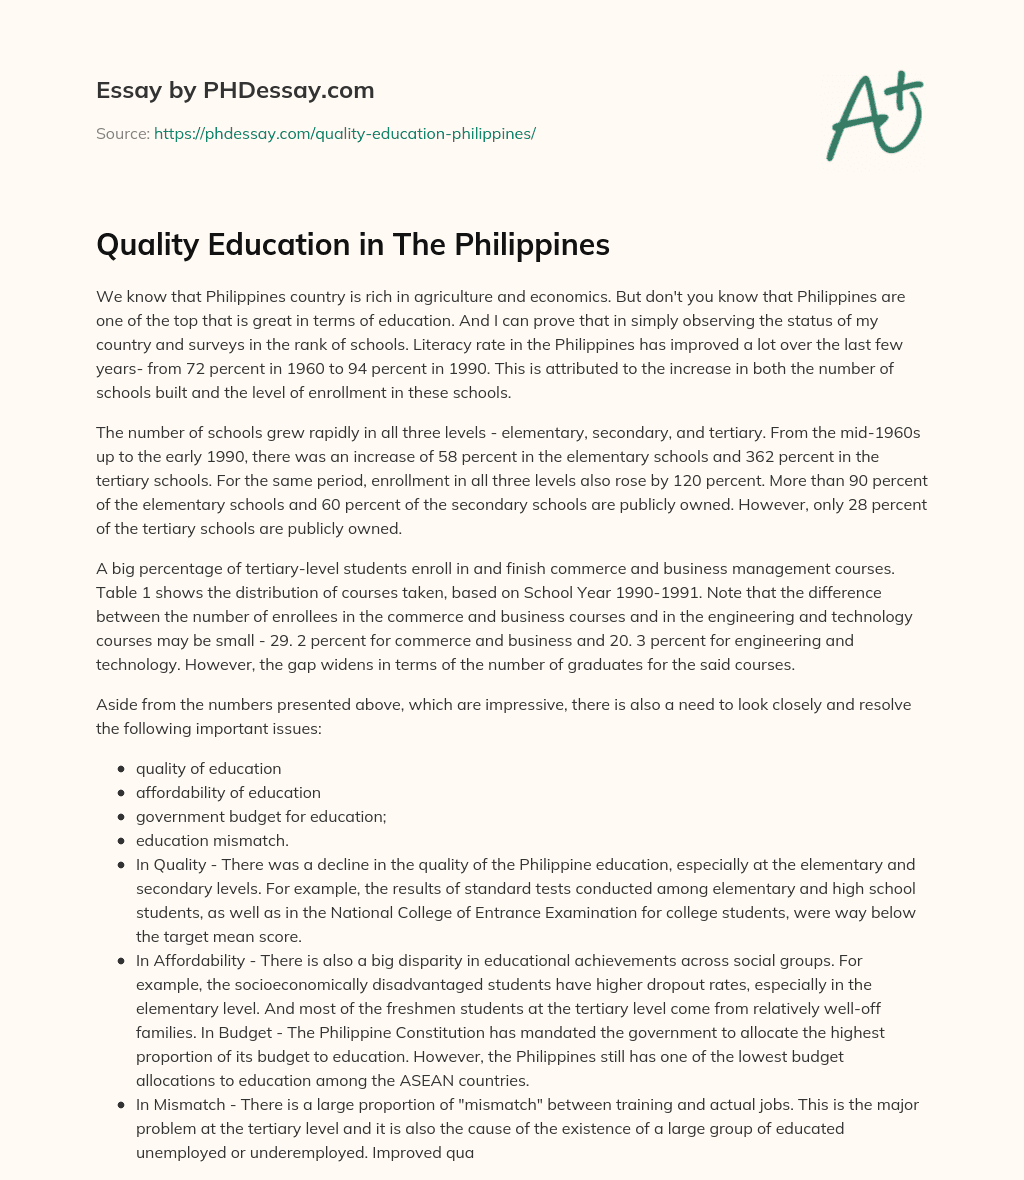 essay about quality education in the philippines